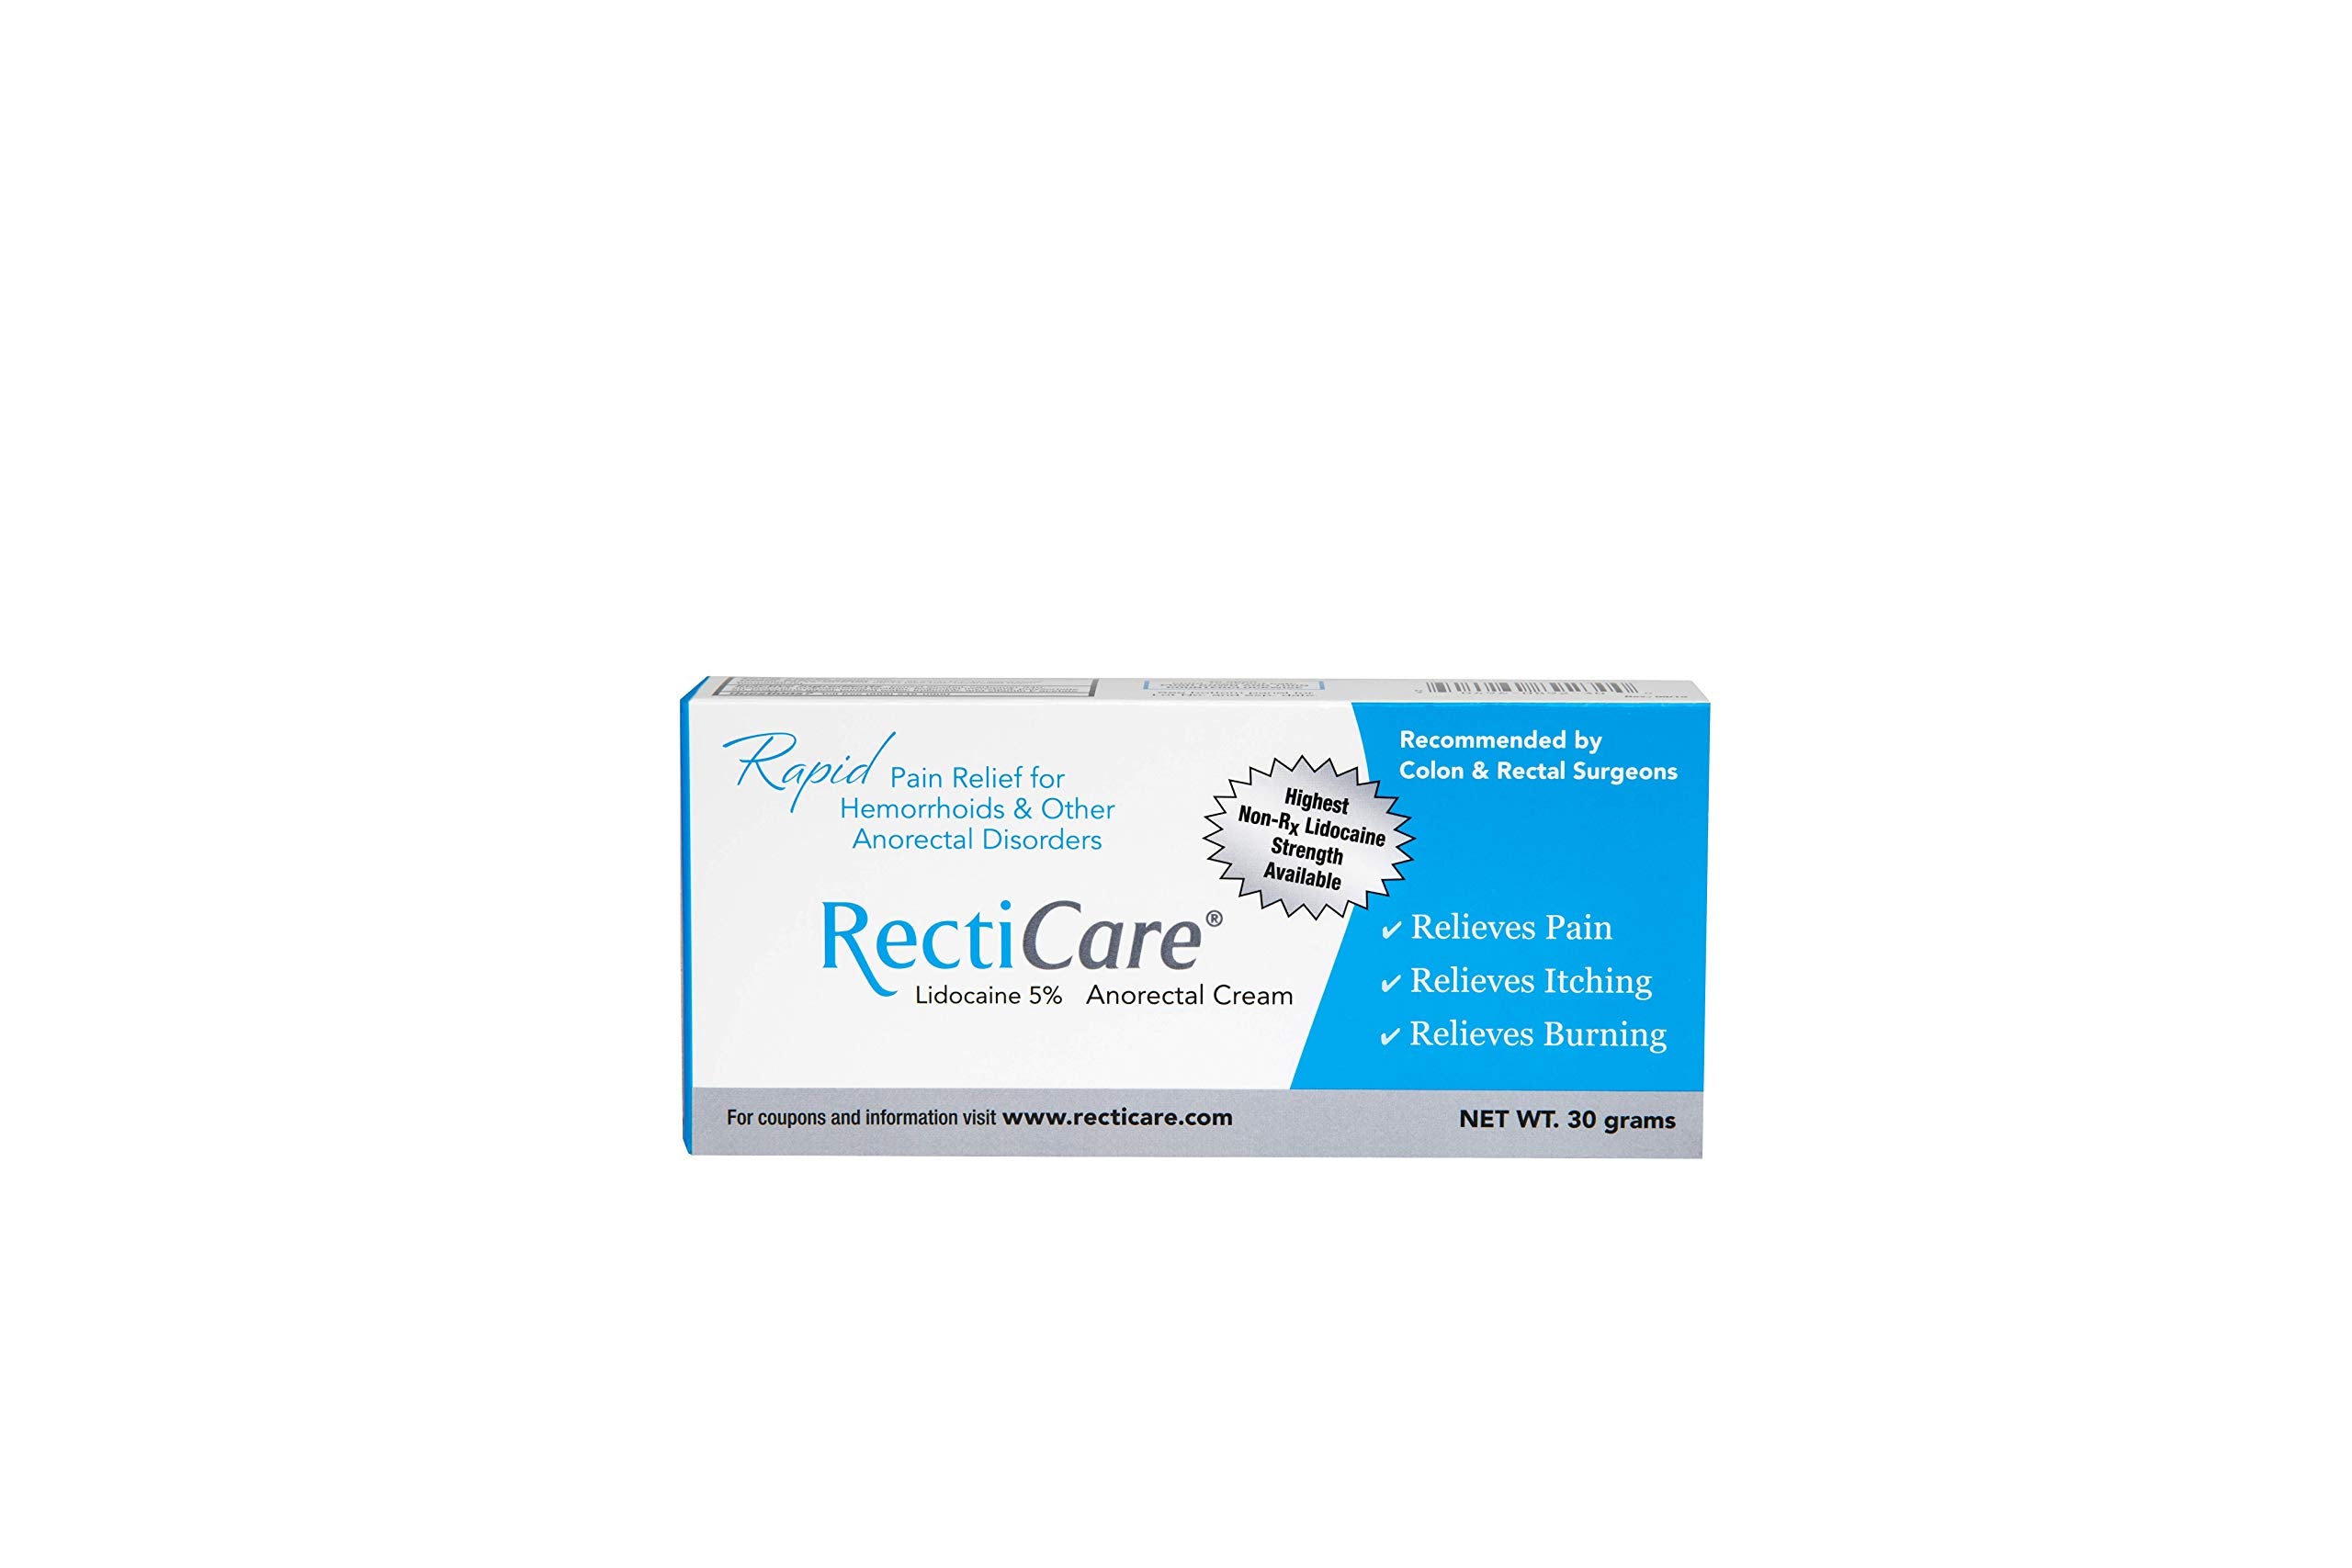 RectiCare Anorectal Lidocaine 5% Cream: Topical Numbing Cream for Treatment of Hemorrhoids & Other Anorectal Disorders - 30g Tube